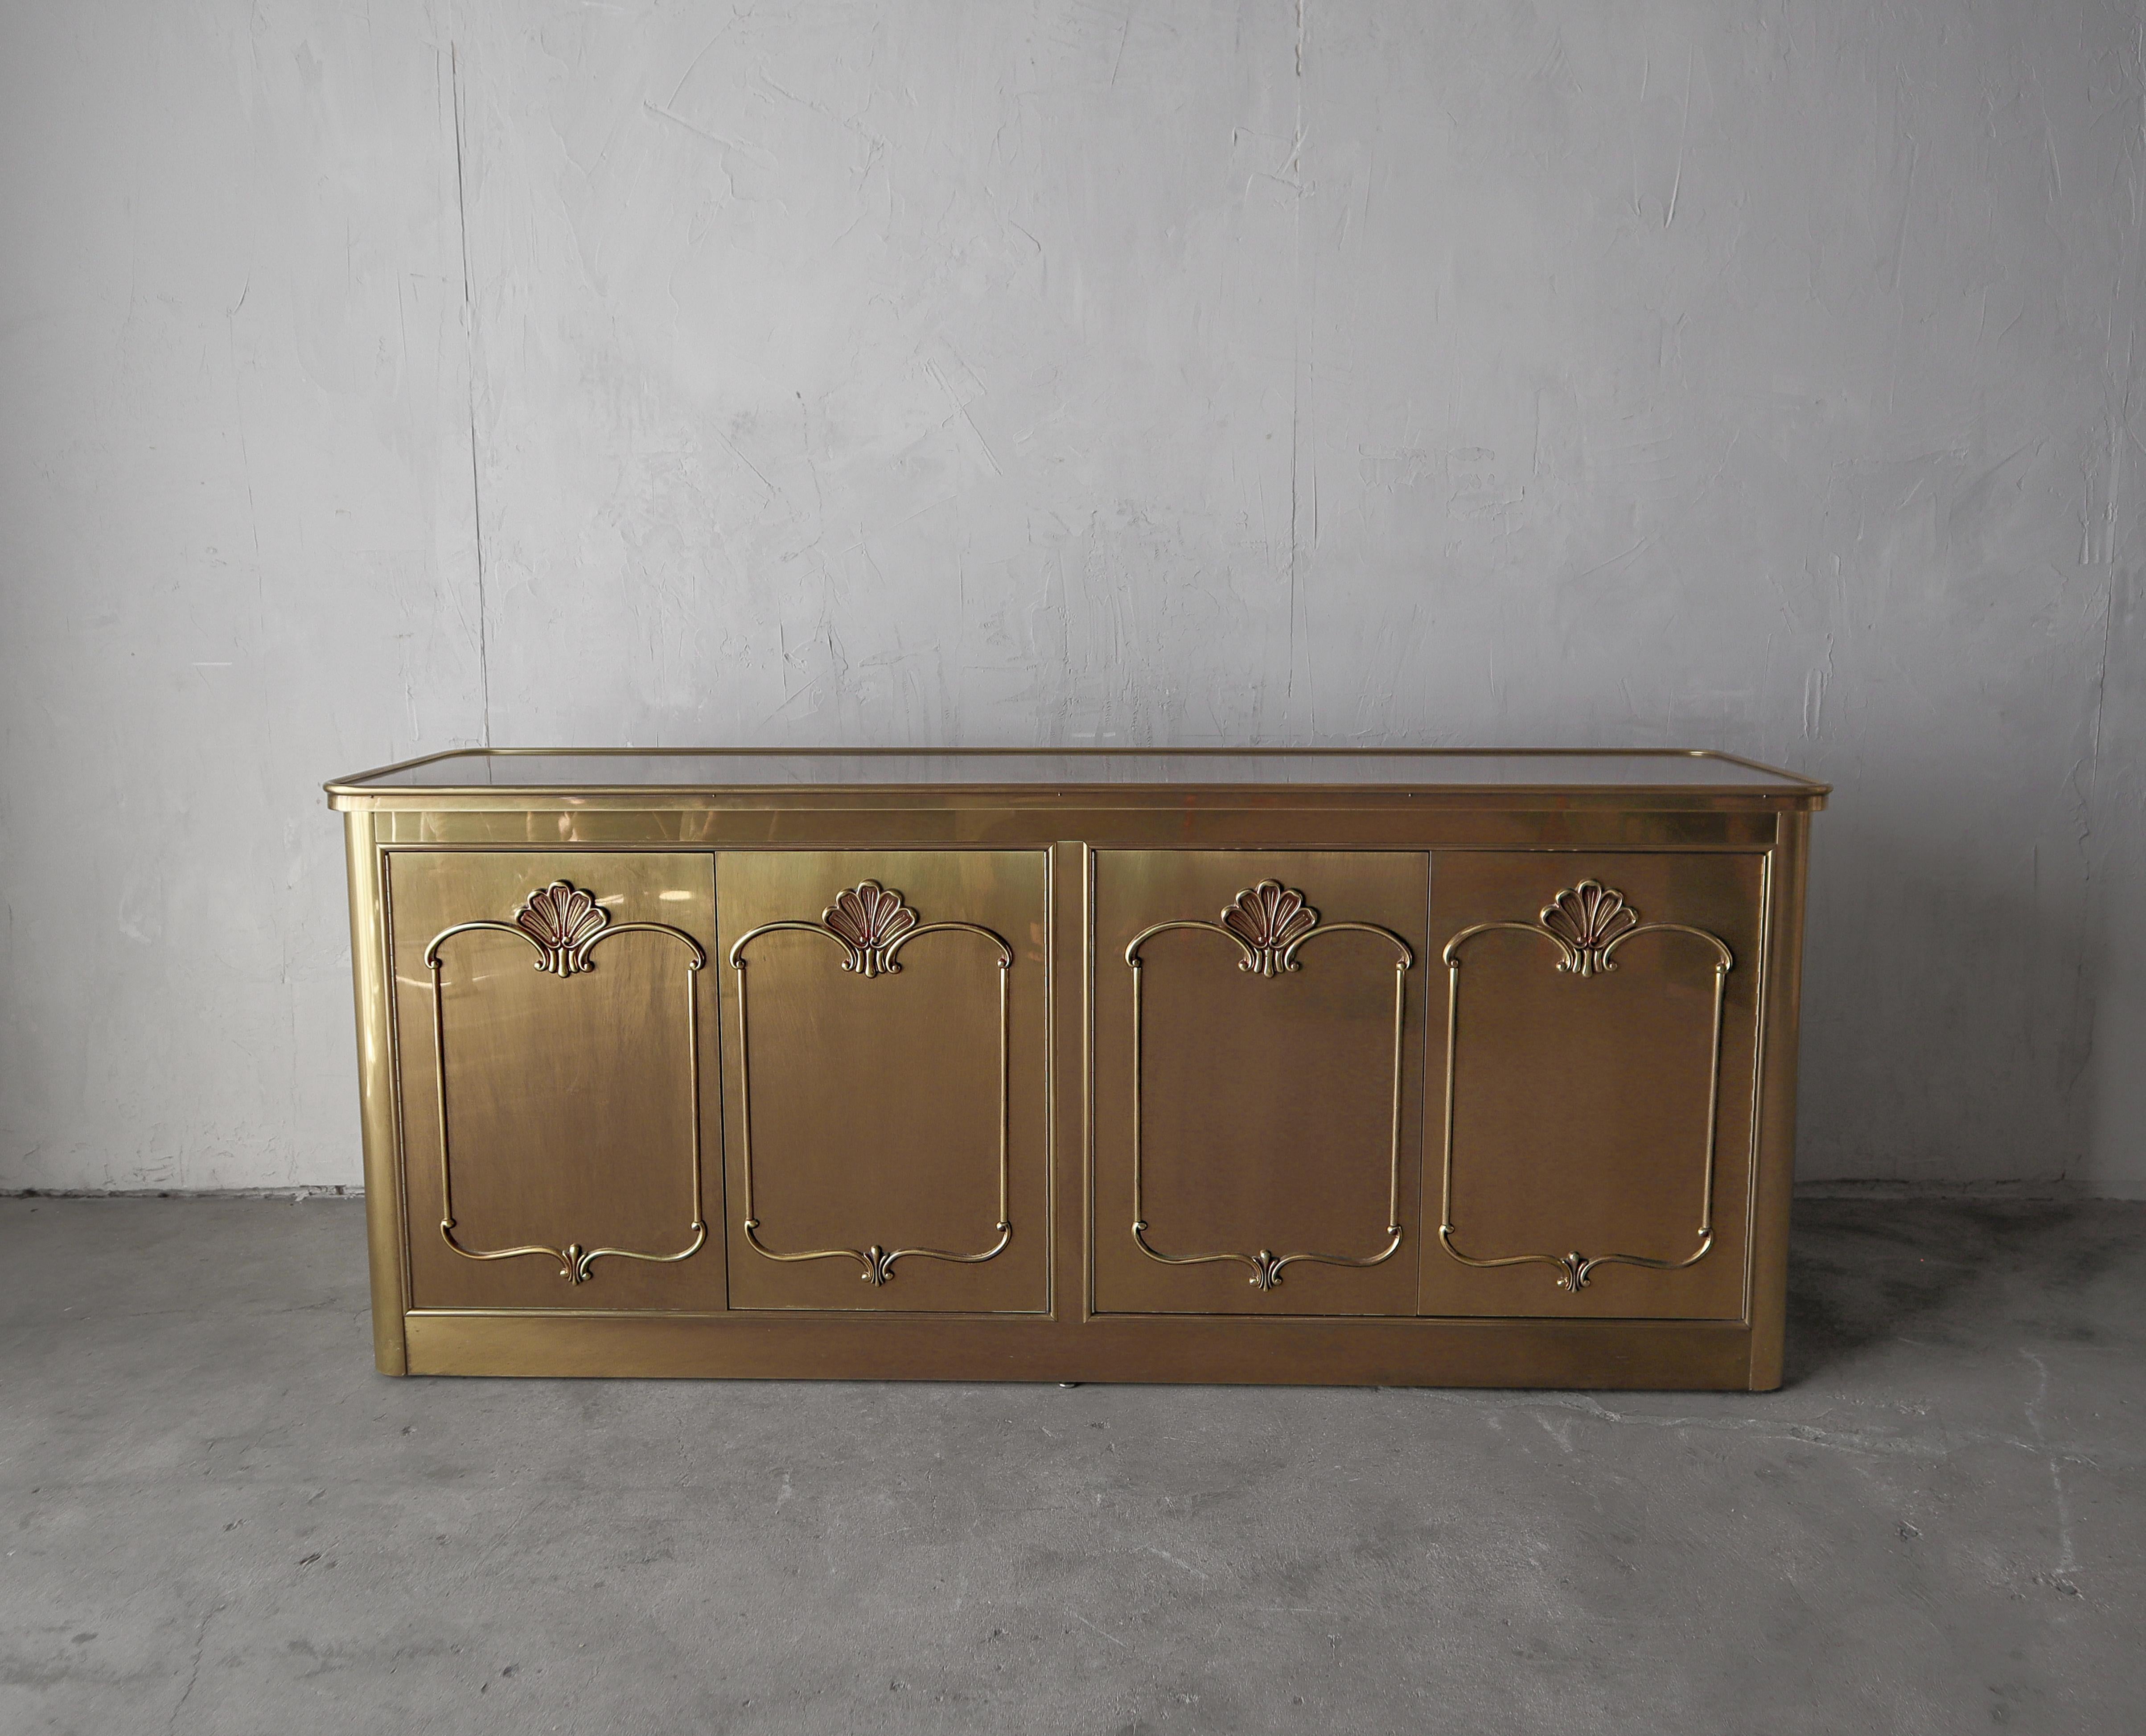 Beautiful brass-clad credenza by Mastercraft with a burled top and dimensional details on the doors.

The cabinet is in excellent condition with no real imperfections to be noted.  Installation ready.